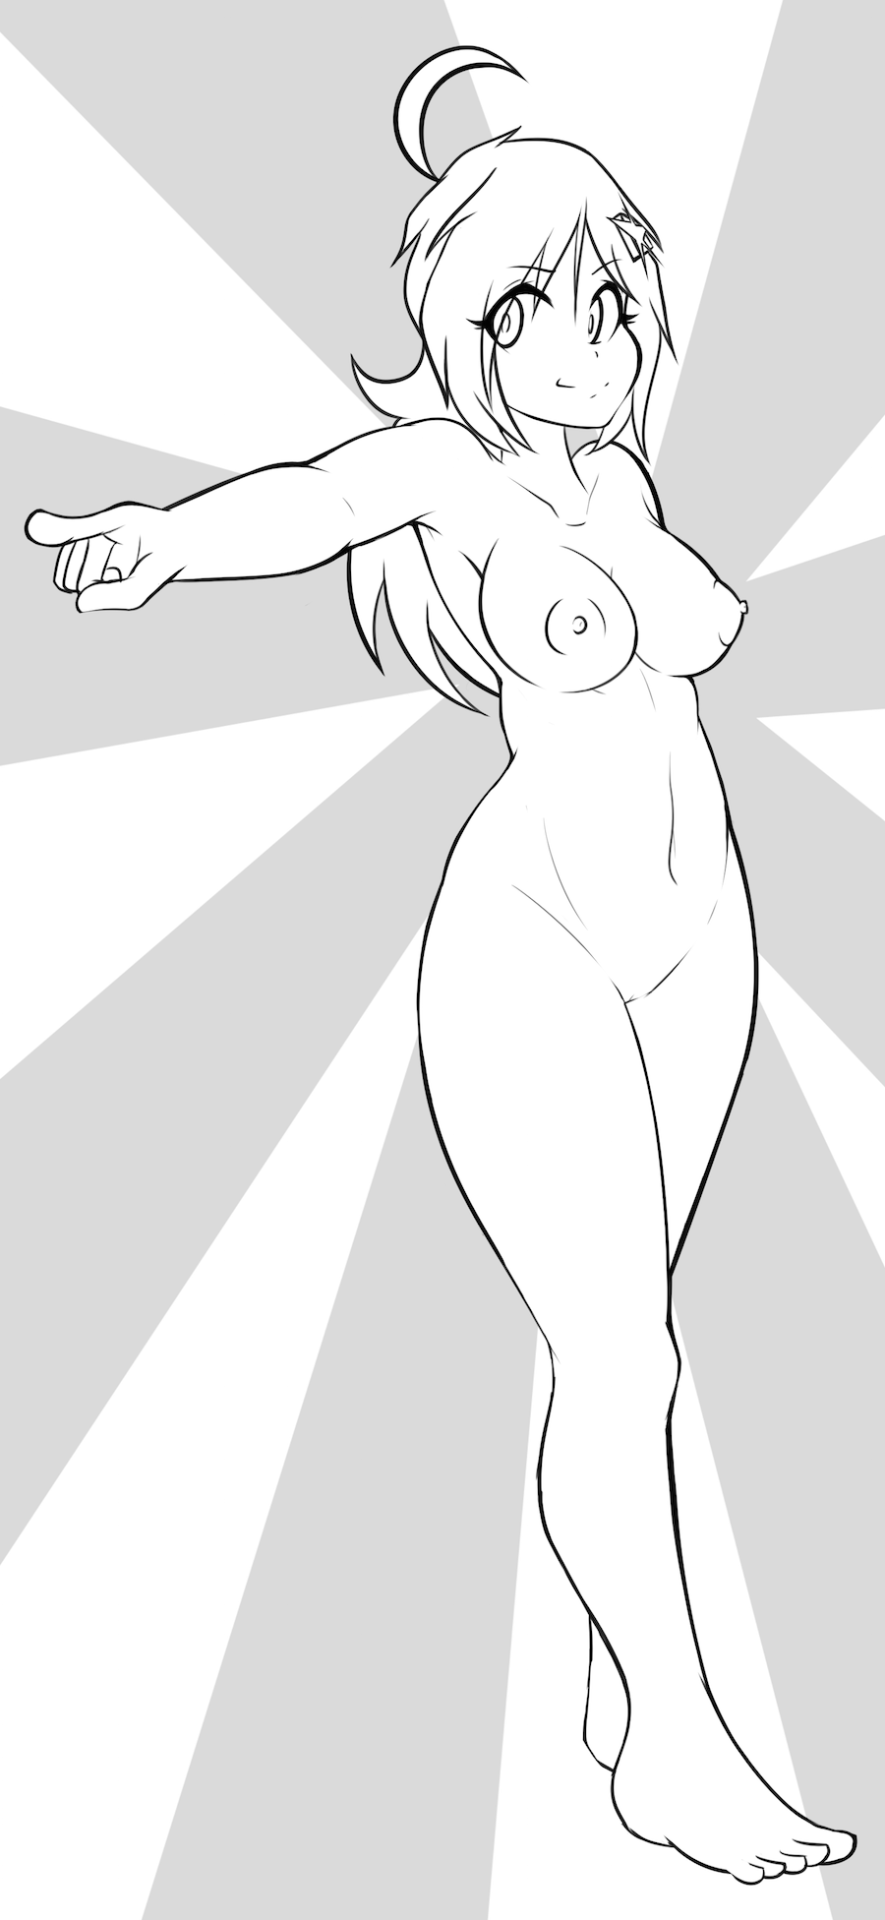 Patreon Sketch 3/6This month Star was requested in the pose pictured. I decided to